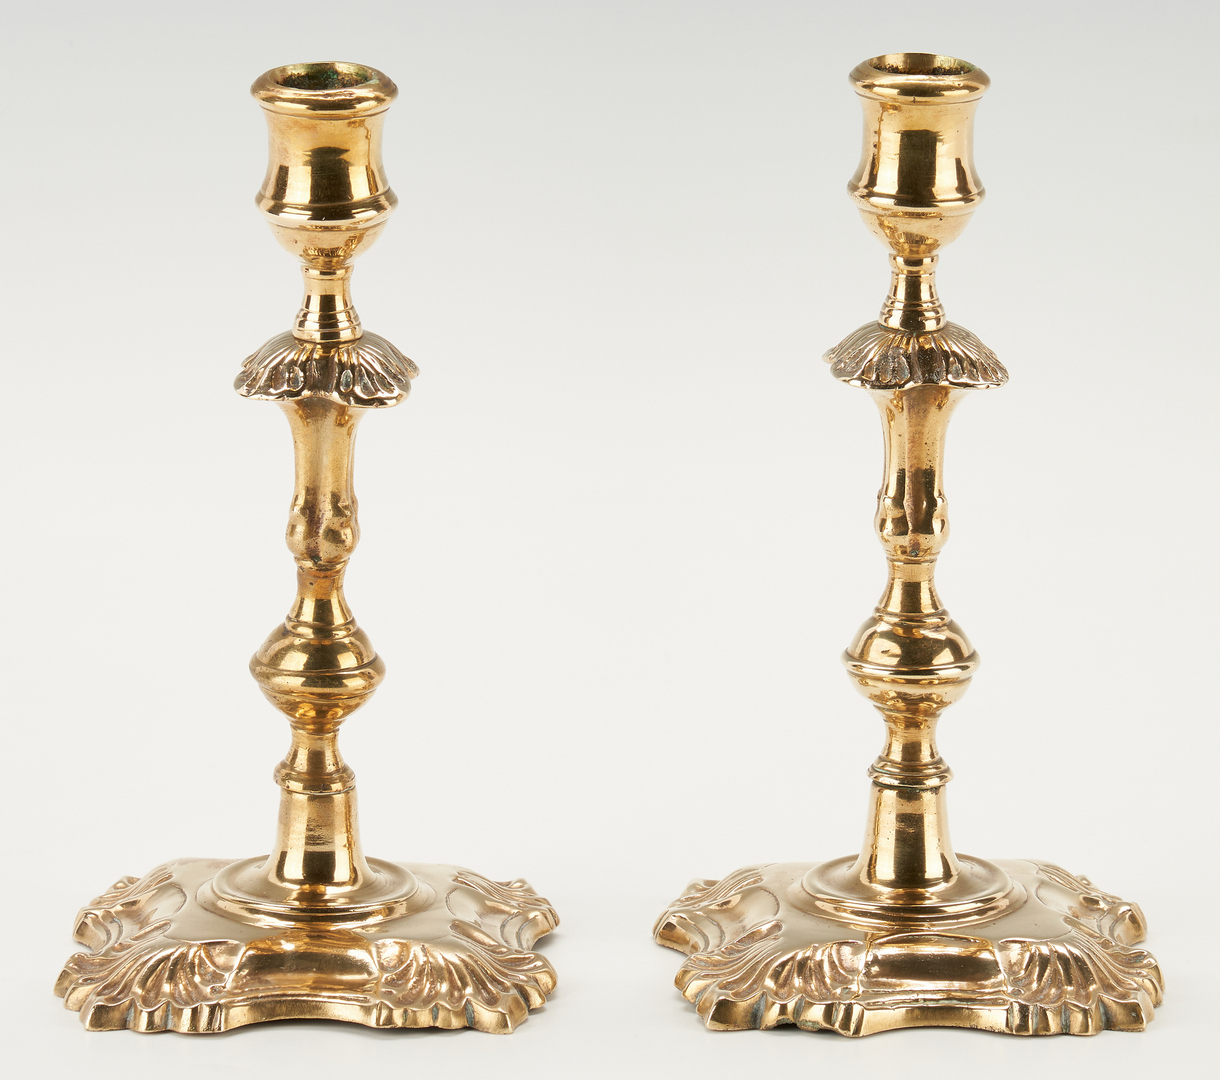 Lot 58: Pair Neo-Classical Urns plus Sterling and Brass Candlesticks